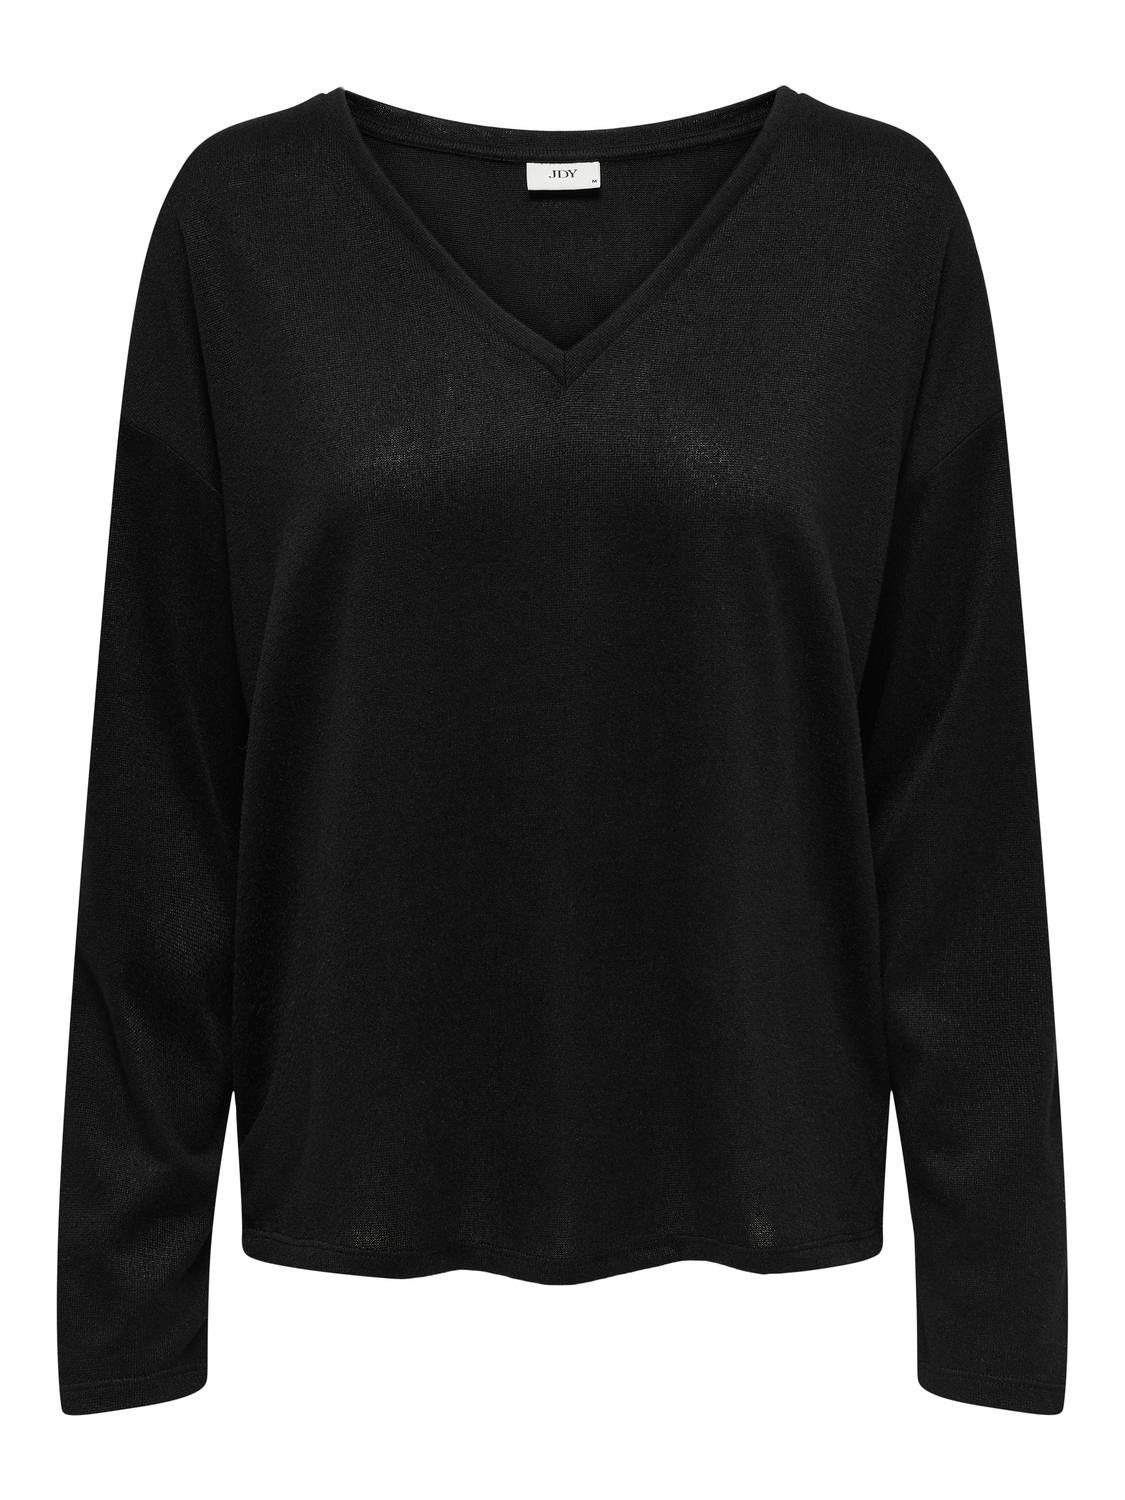 ONLY V-NECH TOP WITH LONG SLEEVES -Black - 15302742